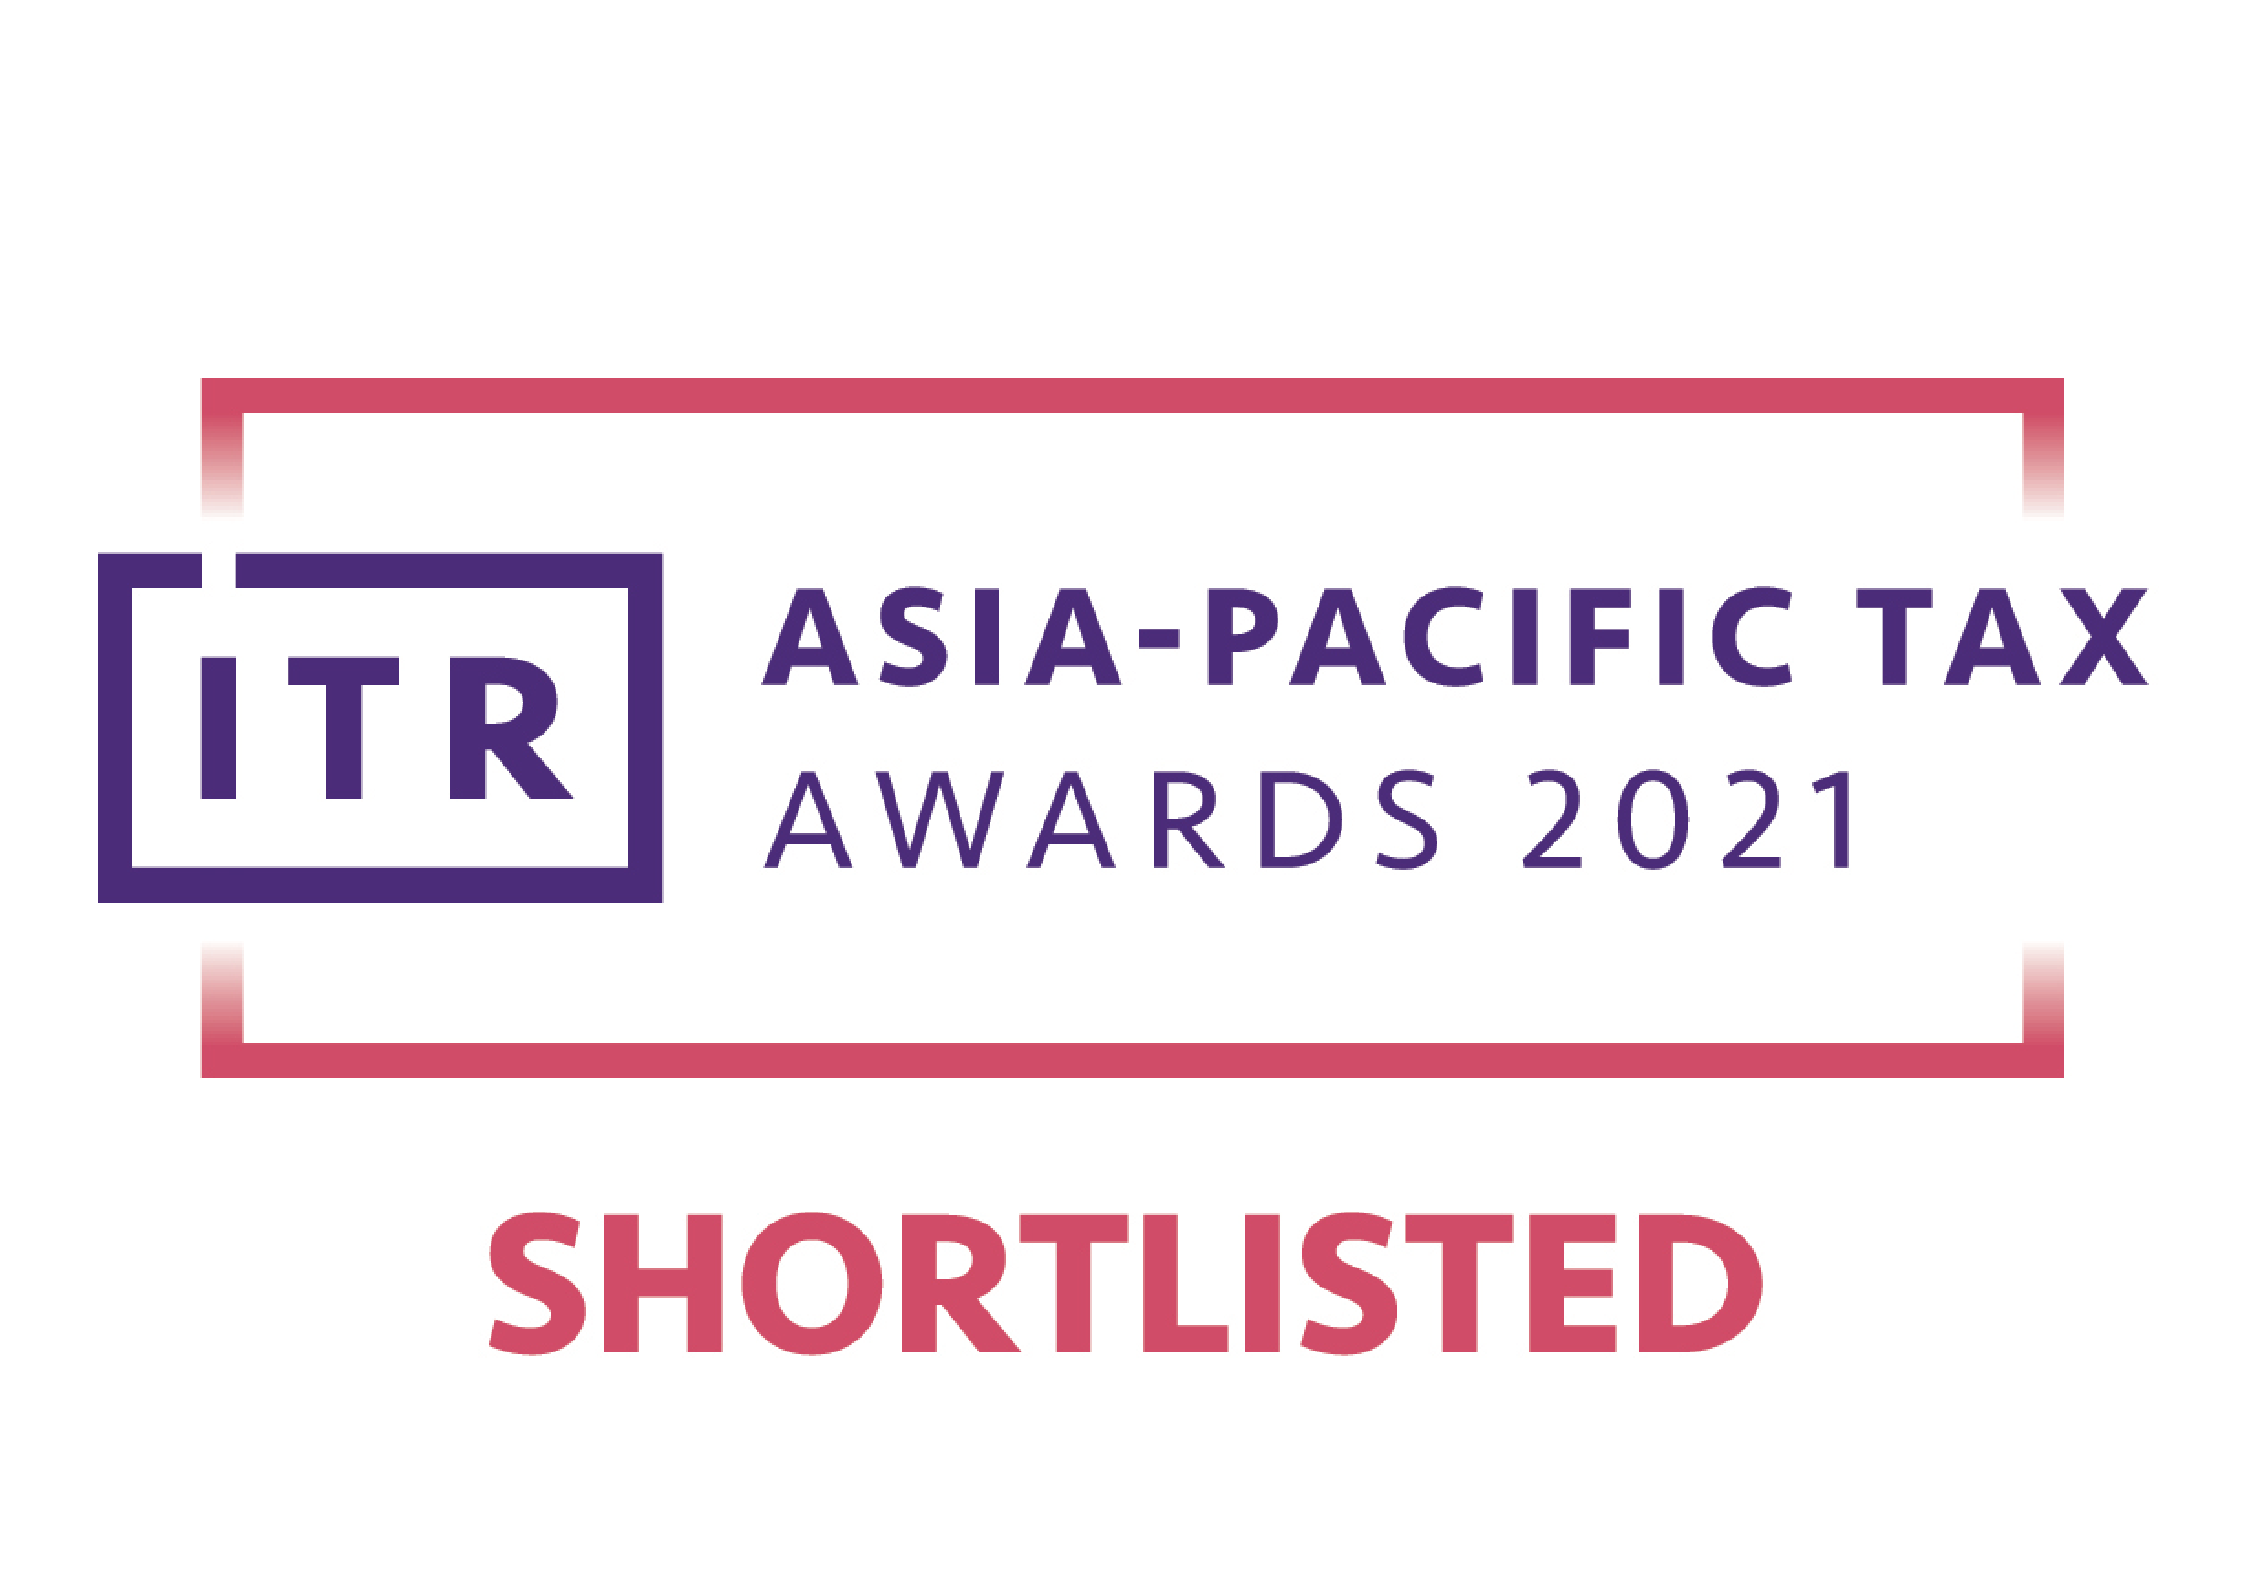 Taxise Asia have made it to the ITR Asia-Pacific Tax Awards Shortlist 2021!